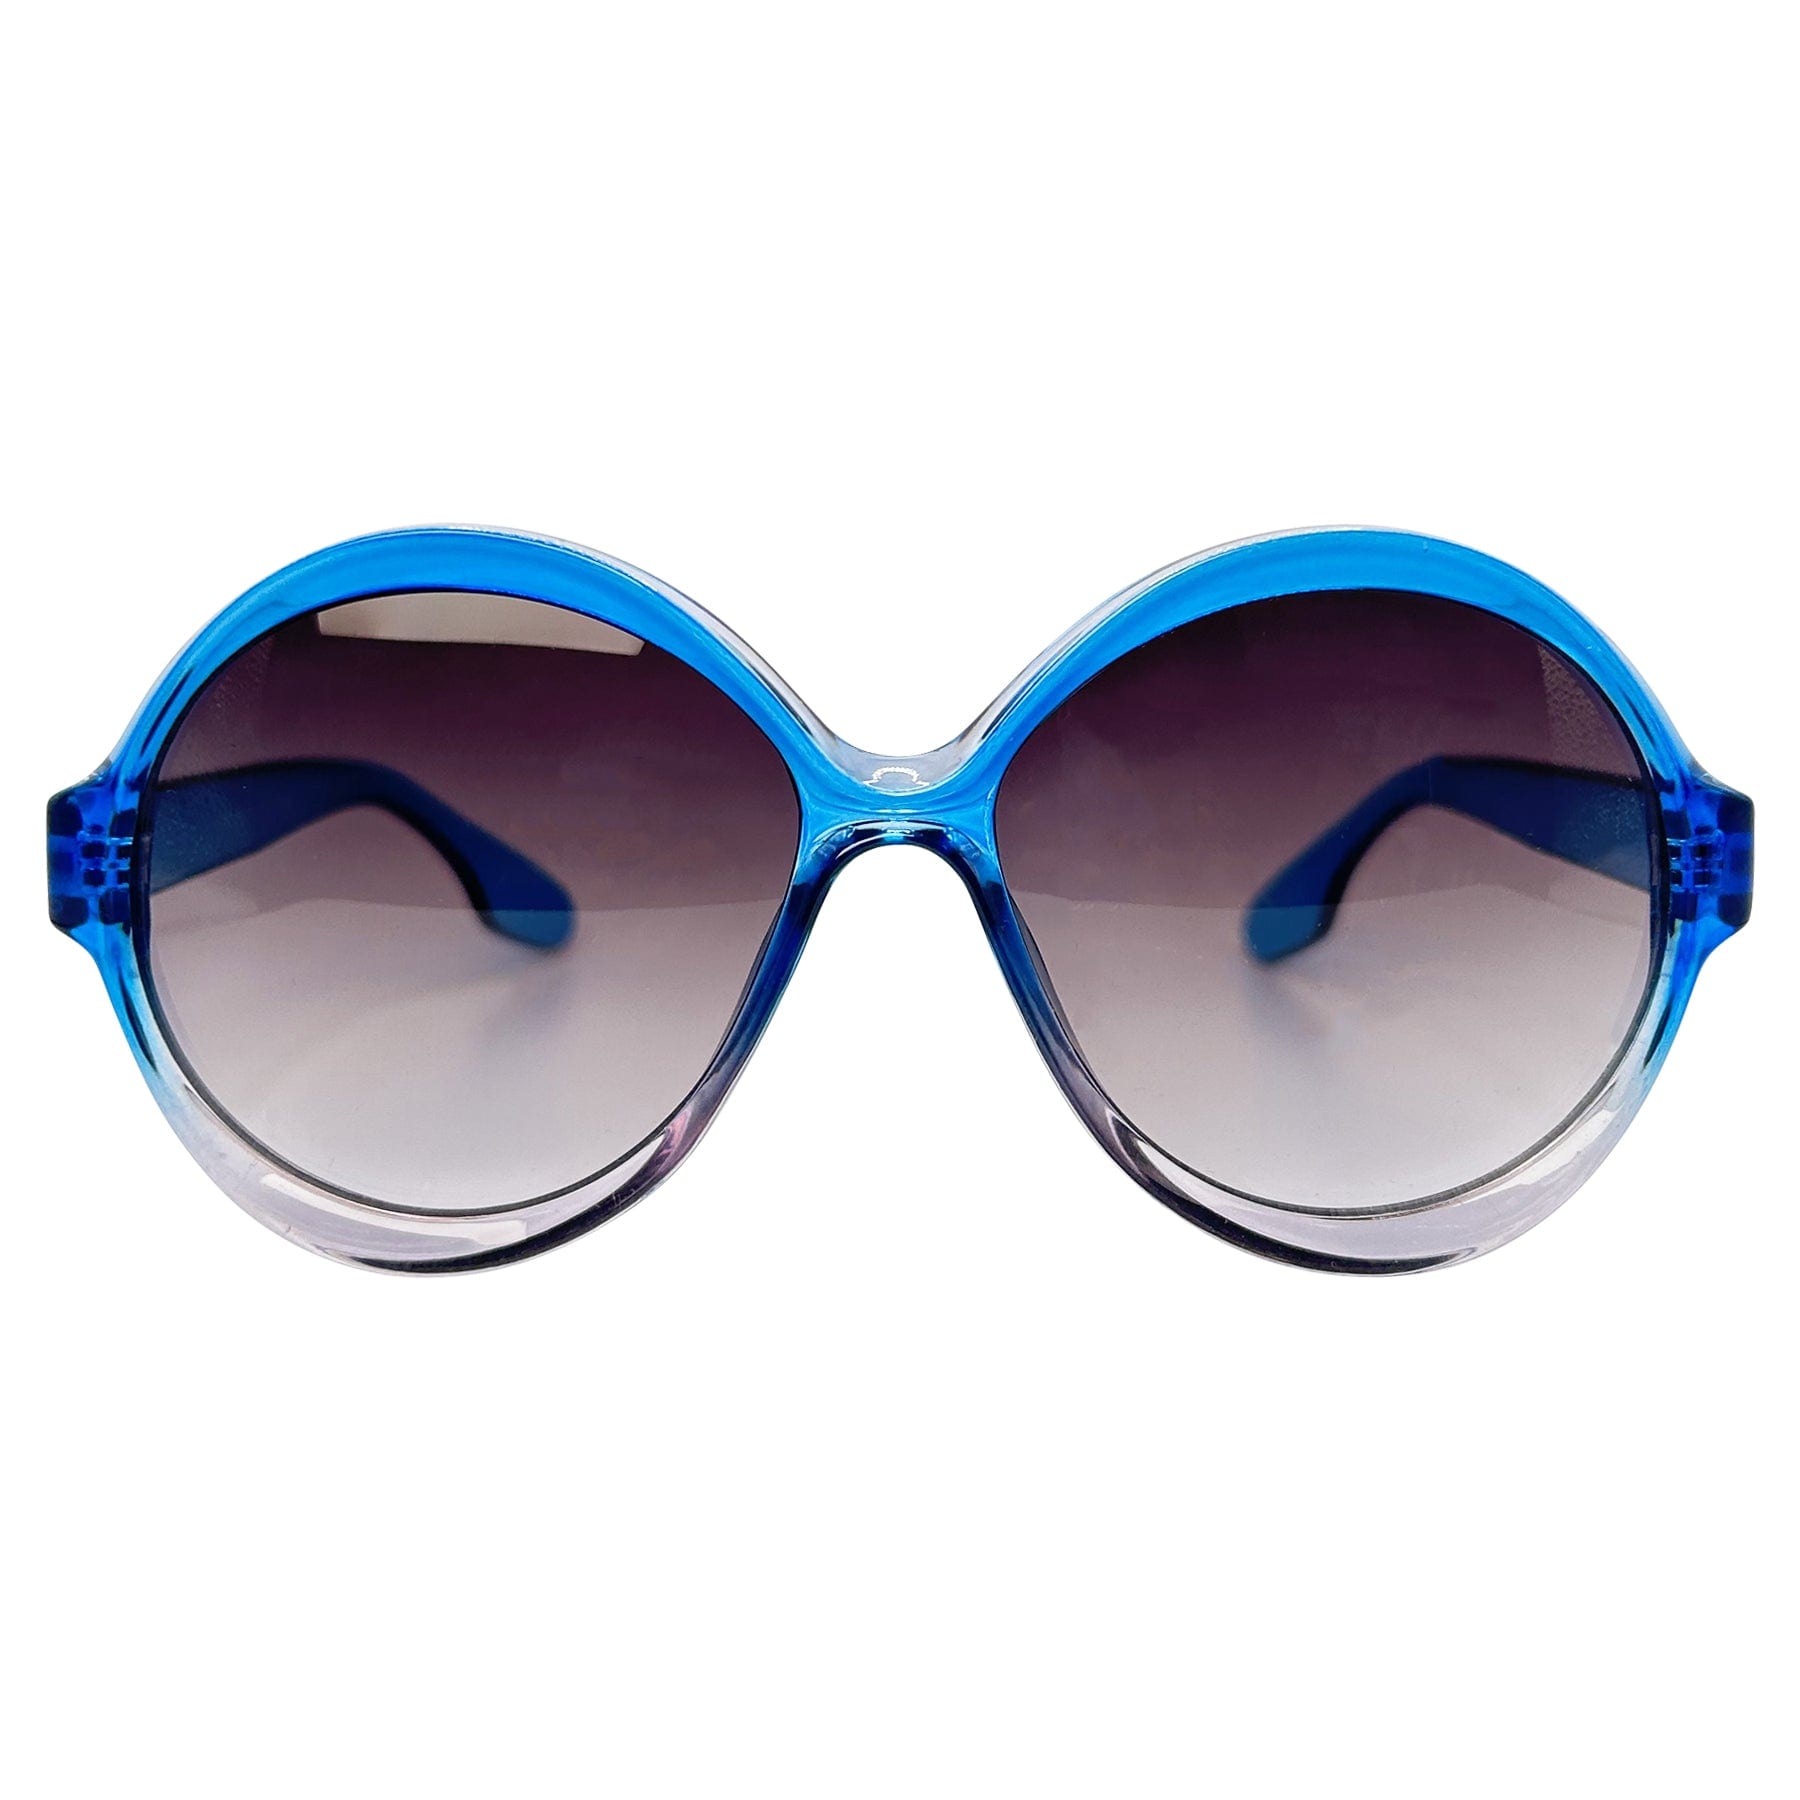 boho chic circle sunglasses with a unqiue ombre frame